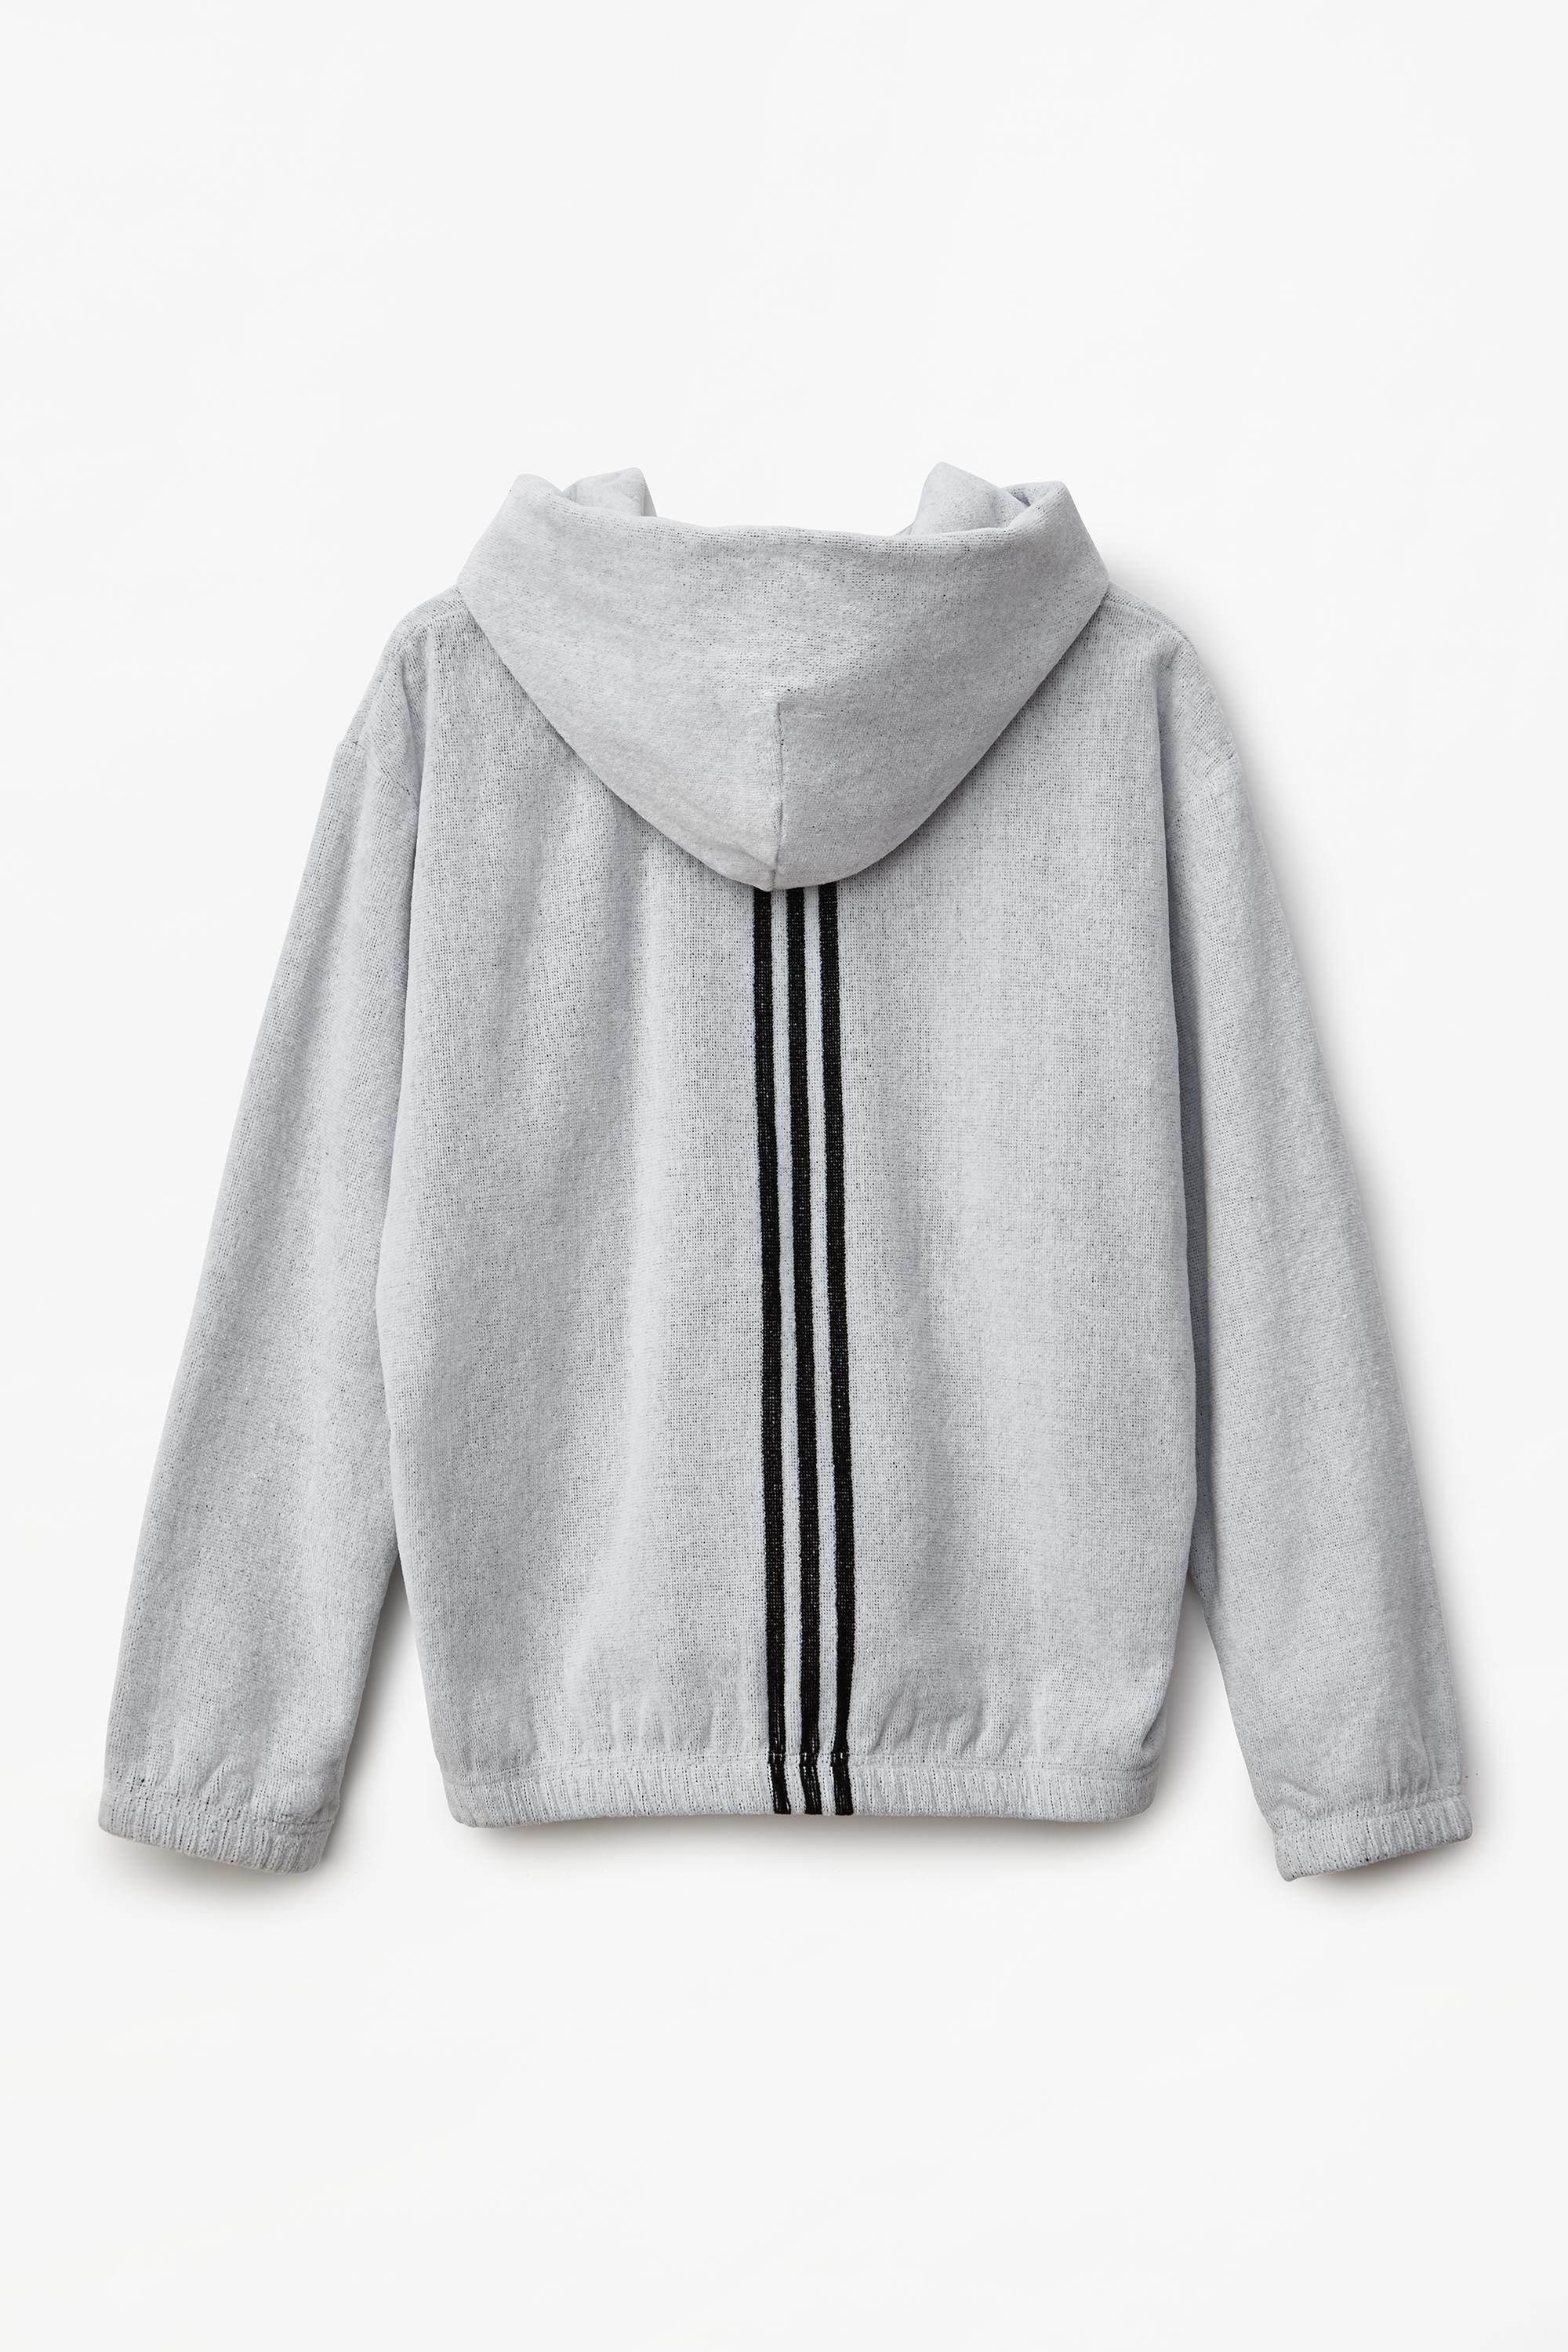 Alexander Wang Cotton Adidas Originals By Aw Towel Hoodie in White for Men  | Lyst